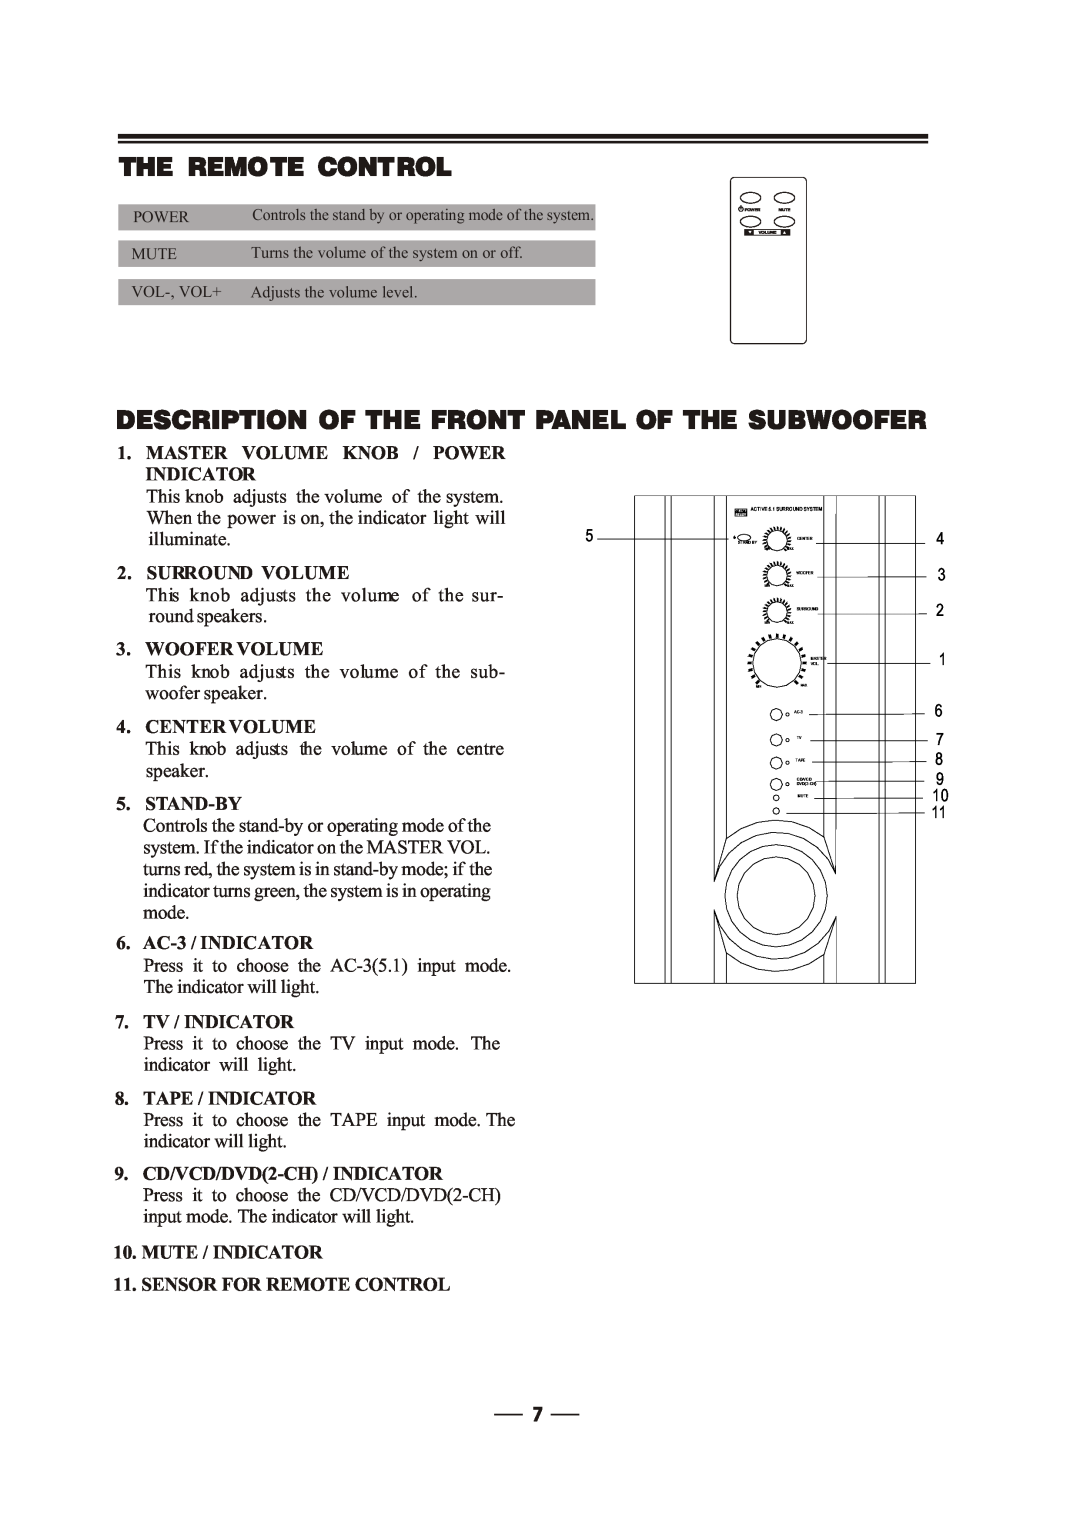 MidiLand 747H manual The Remote Control, Description Of The Front Panel Of The Subwoofer 